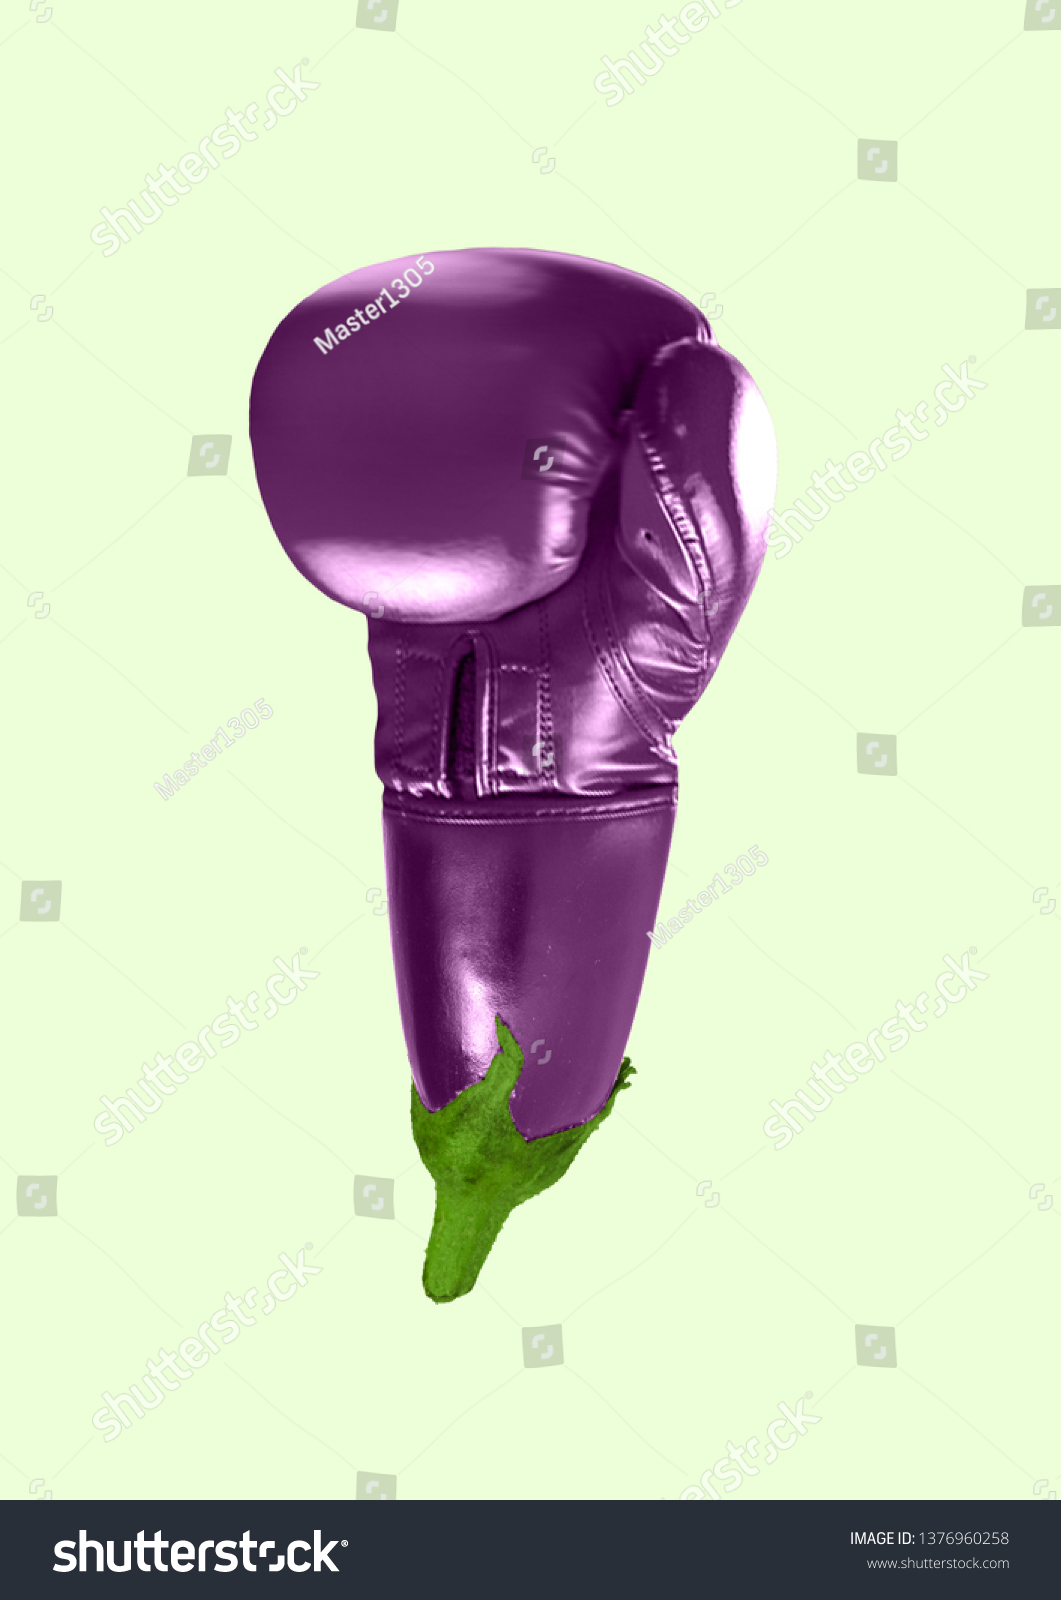 An alternative sport or hematoma. A boxing glove as an eggplant on green background. Negative space to insert your text. Modern design. Contemporary art collage. Concept of food, movement, plants. #1376960258